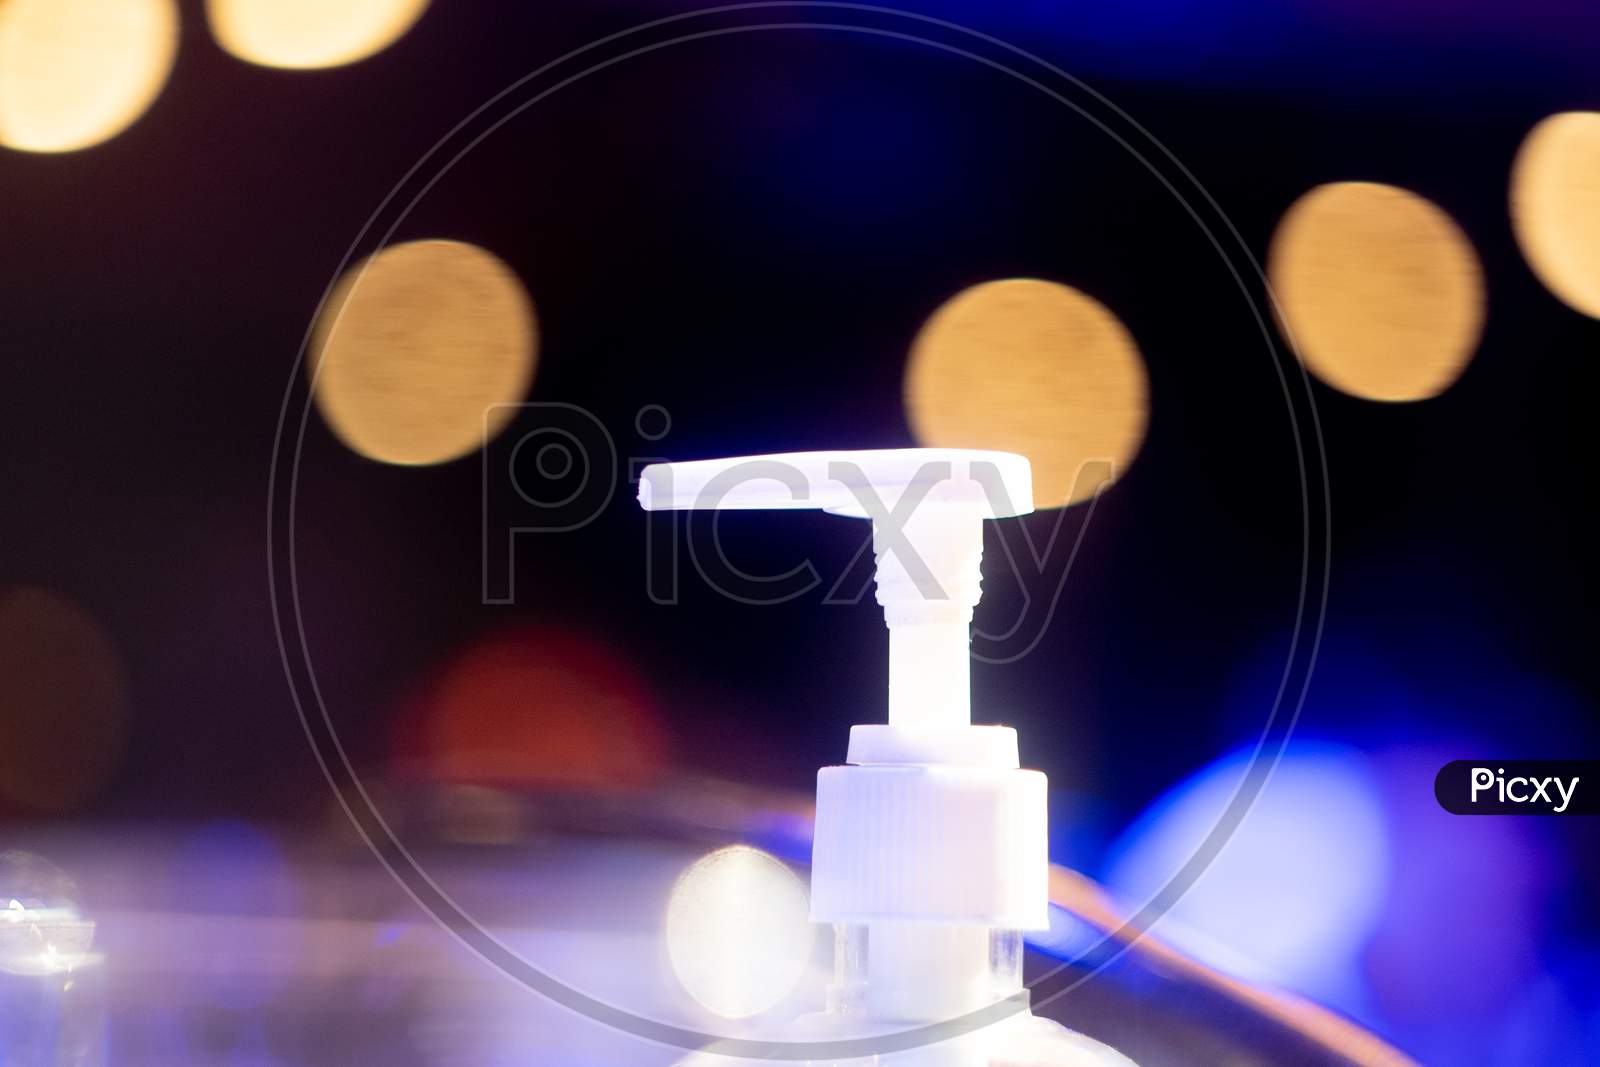 Sanitizer Bottle Nozzle With Out Of Focus Bokeh Balls Showing New Normal In Bars Clubs Restaurants Pubs Post The Coronavirus Covid 19 Pandemic As They Unlock